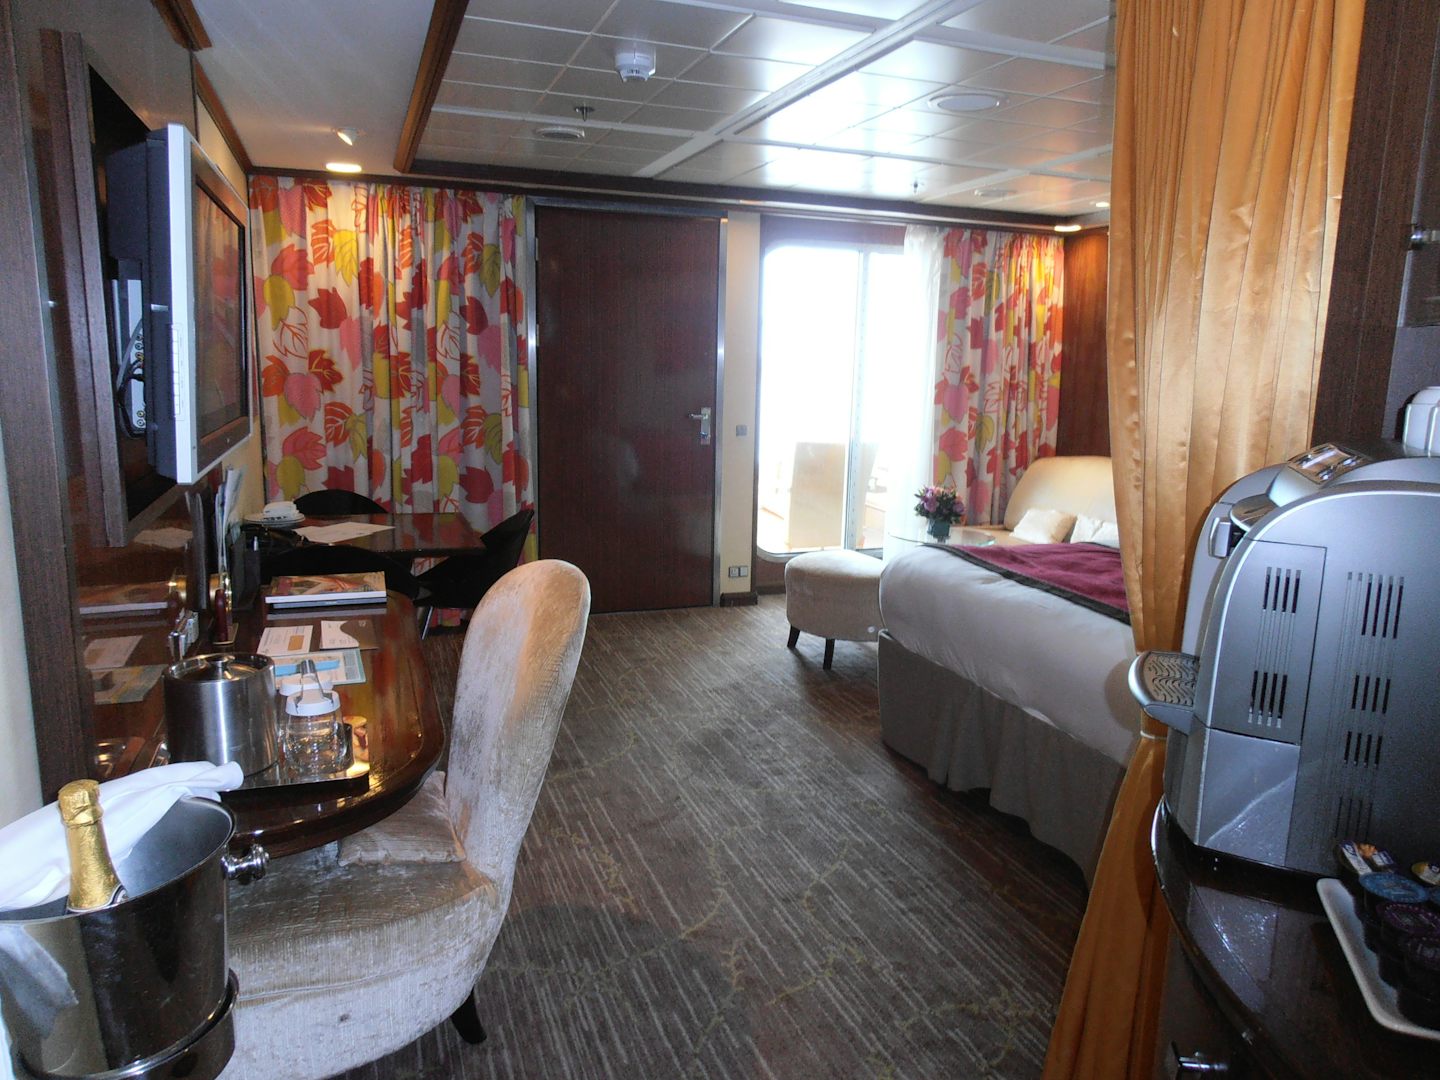 Cabin view - very comfy & large for 11-day cruise